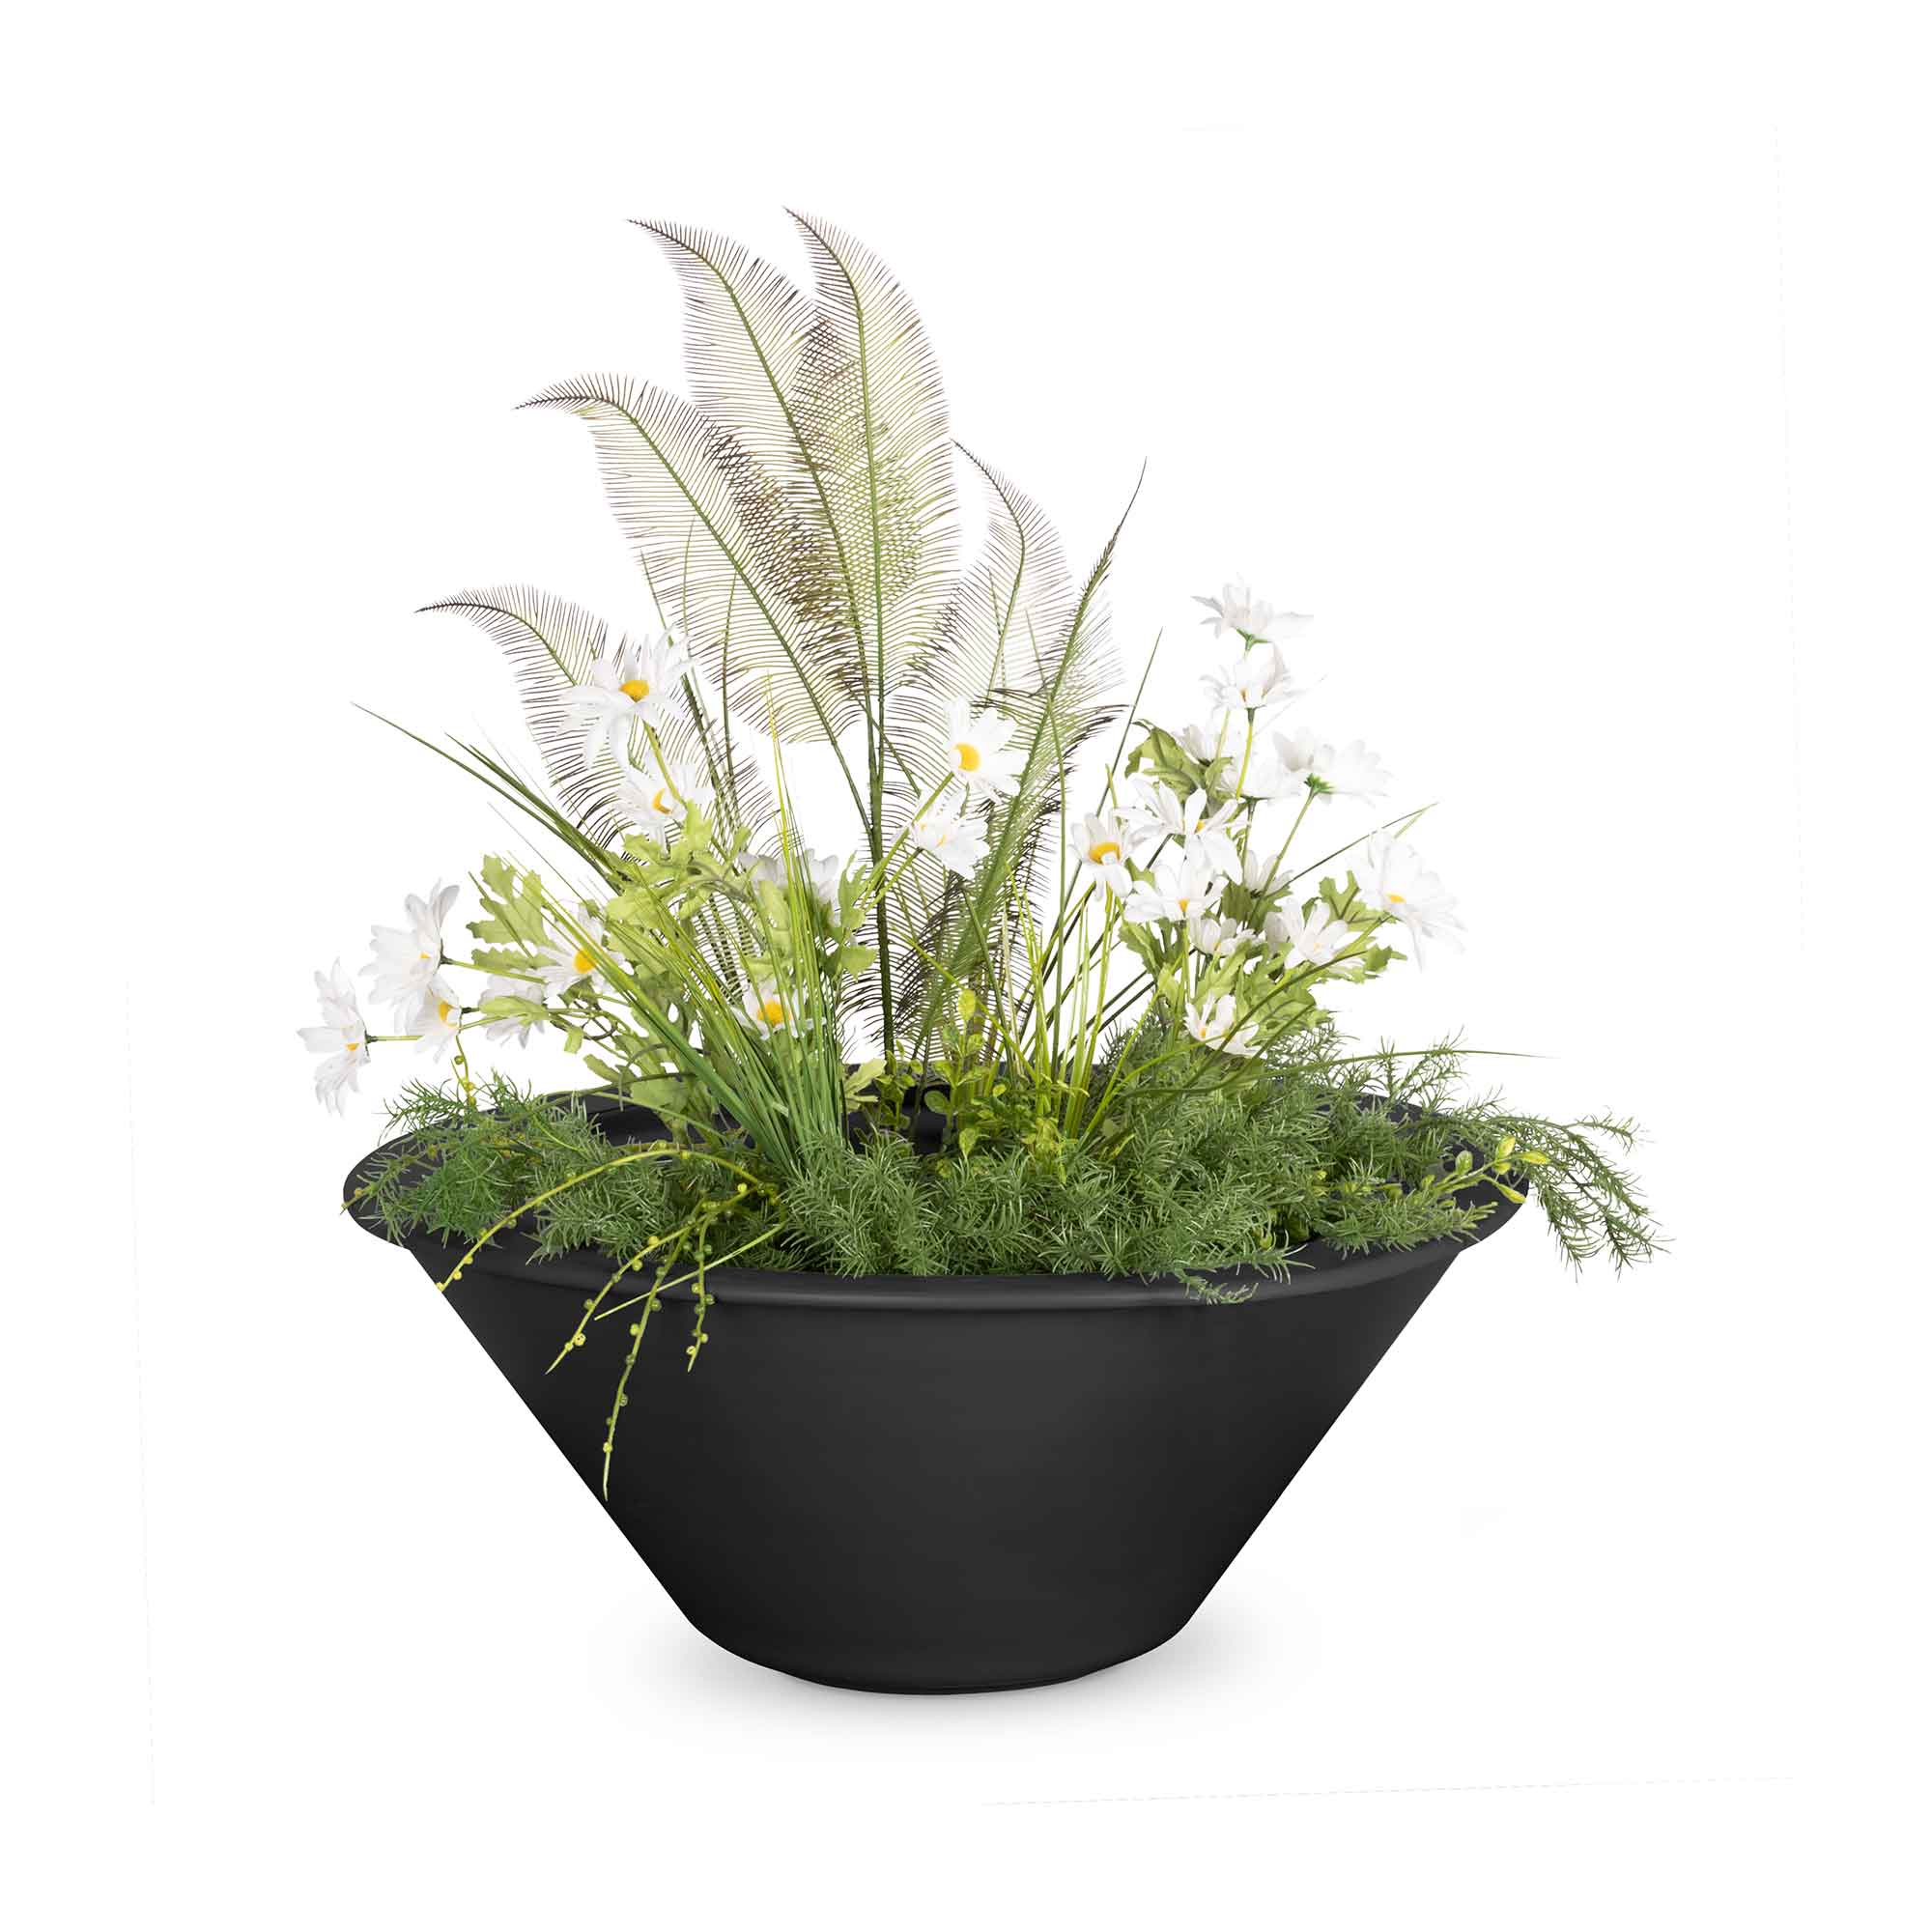 TOP Fires Cazo Powder Coated Metal Planter Bowl by The Outdoor Plus - Majestic Fountains